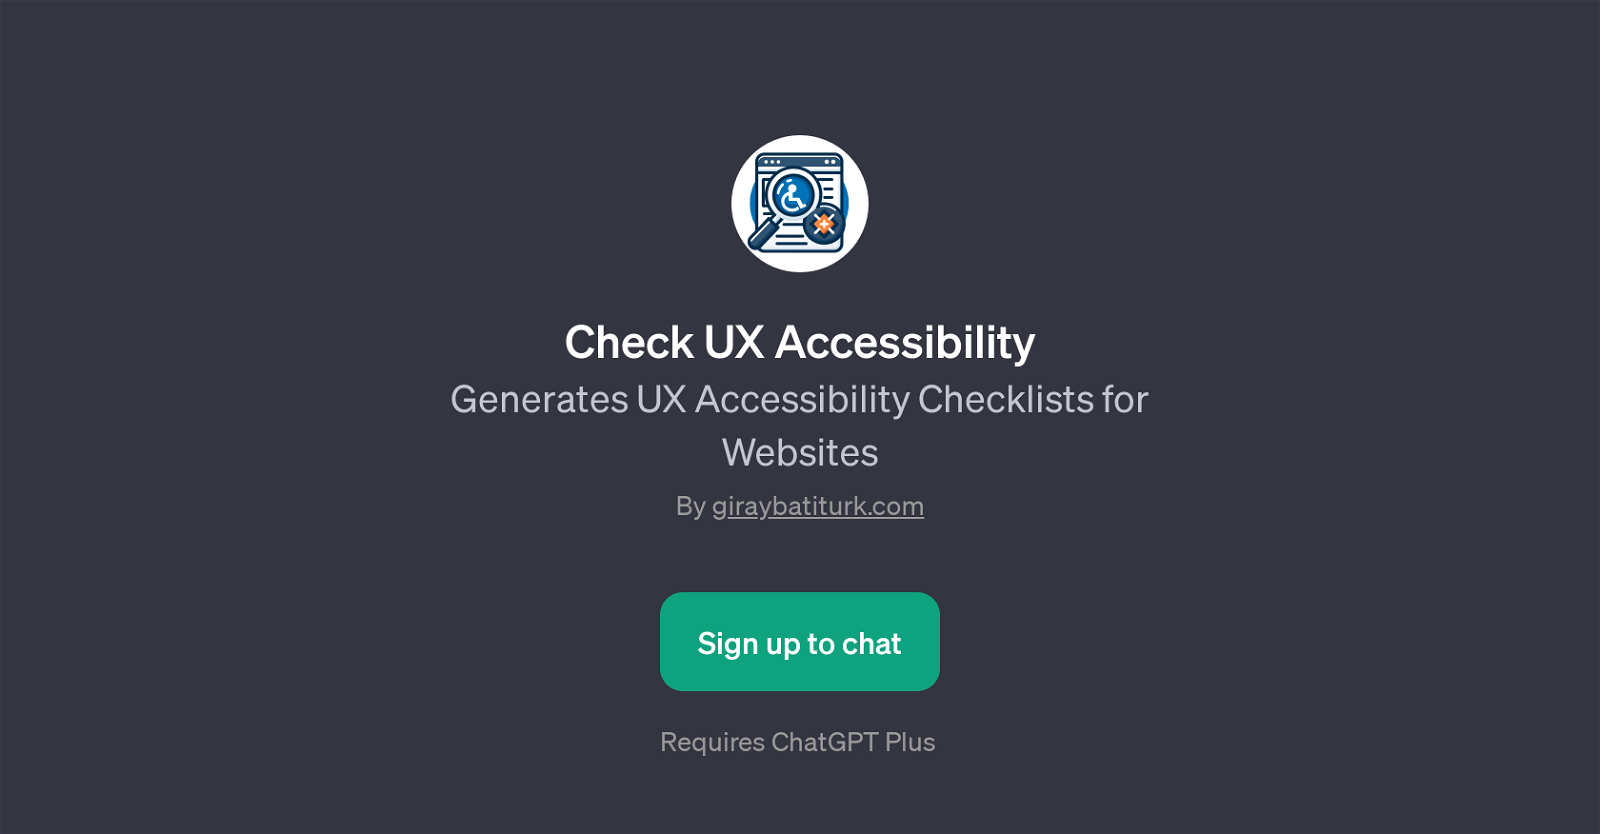 Check UX Accessibility website